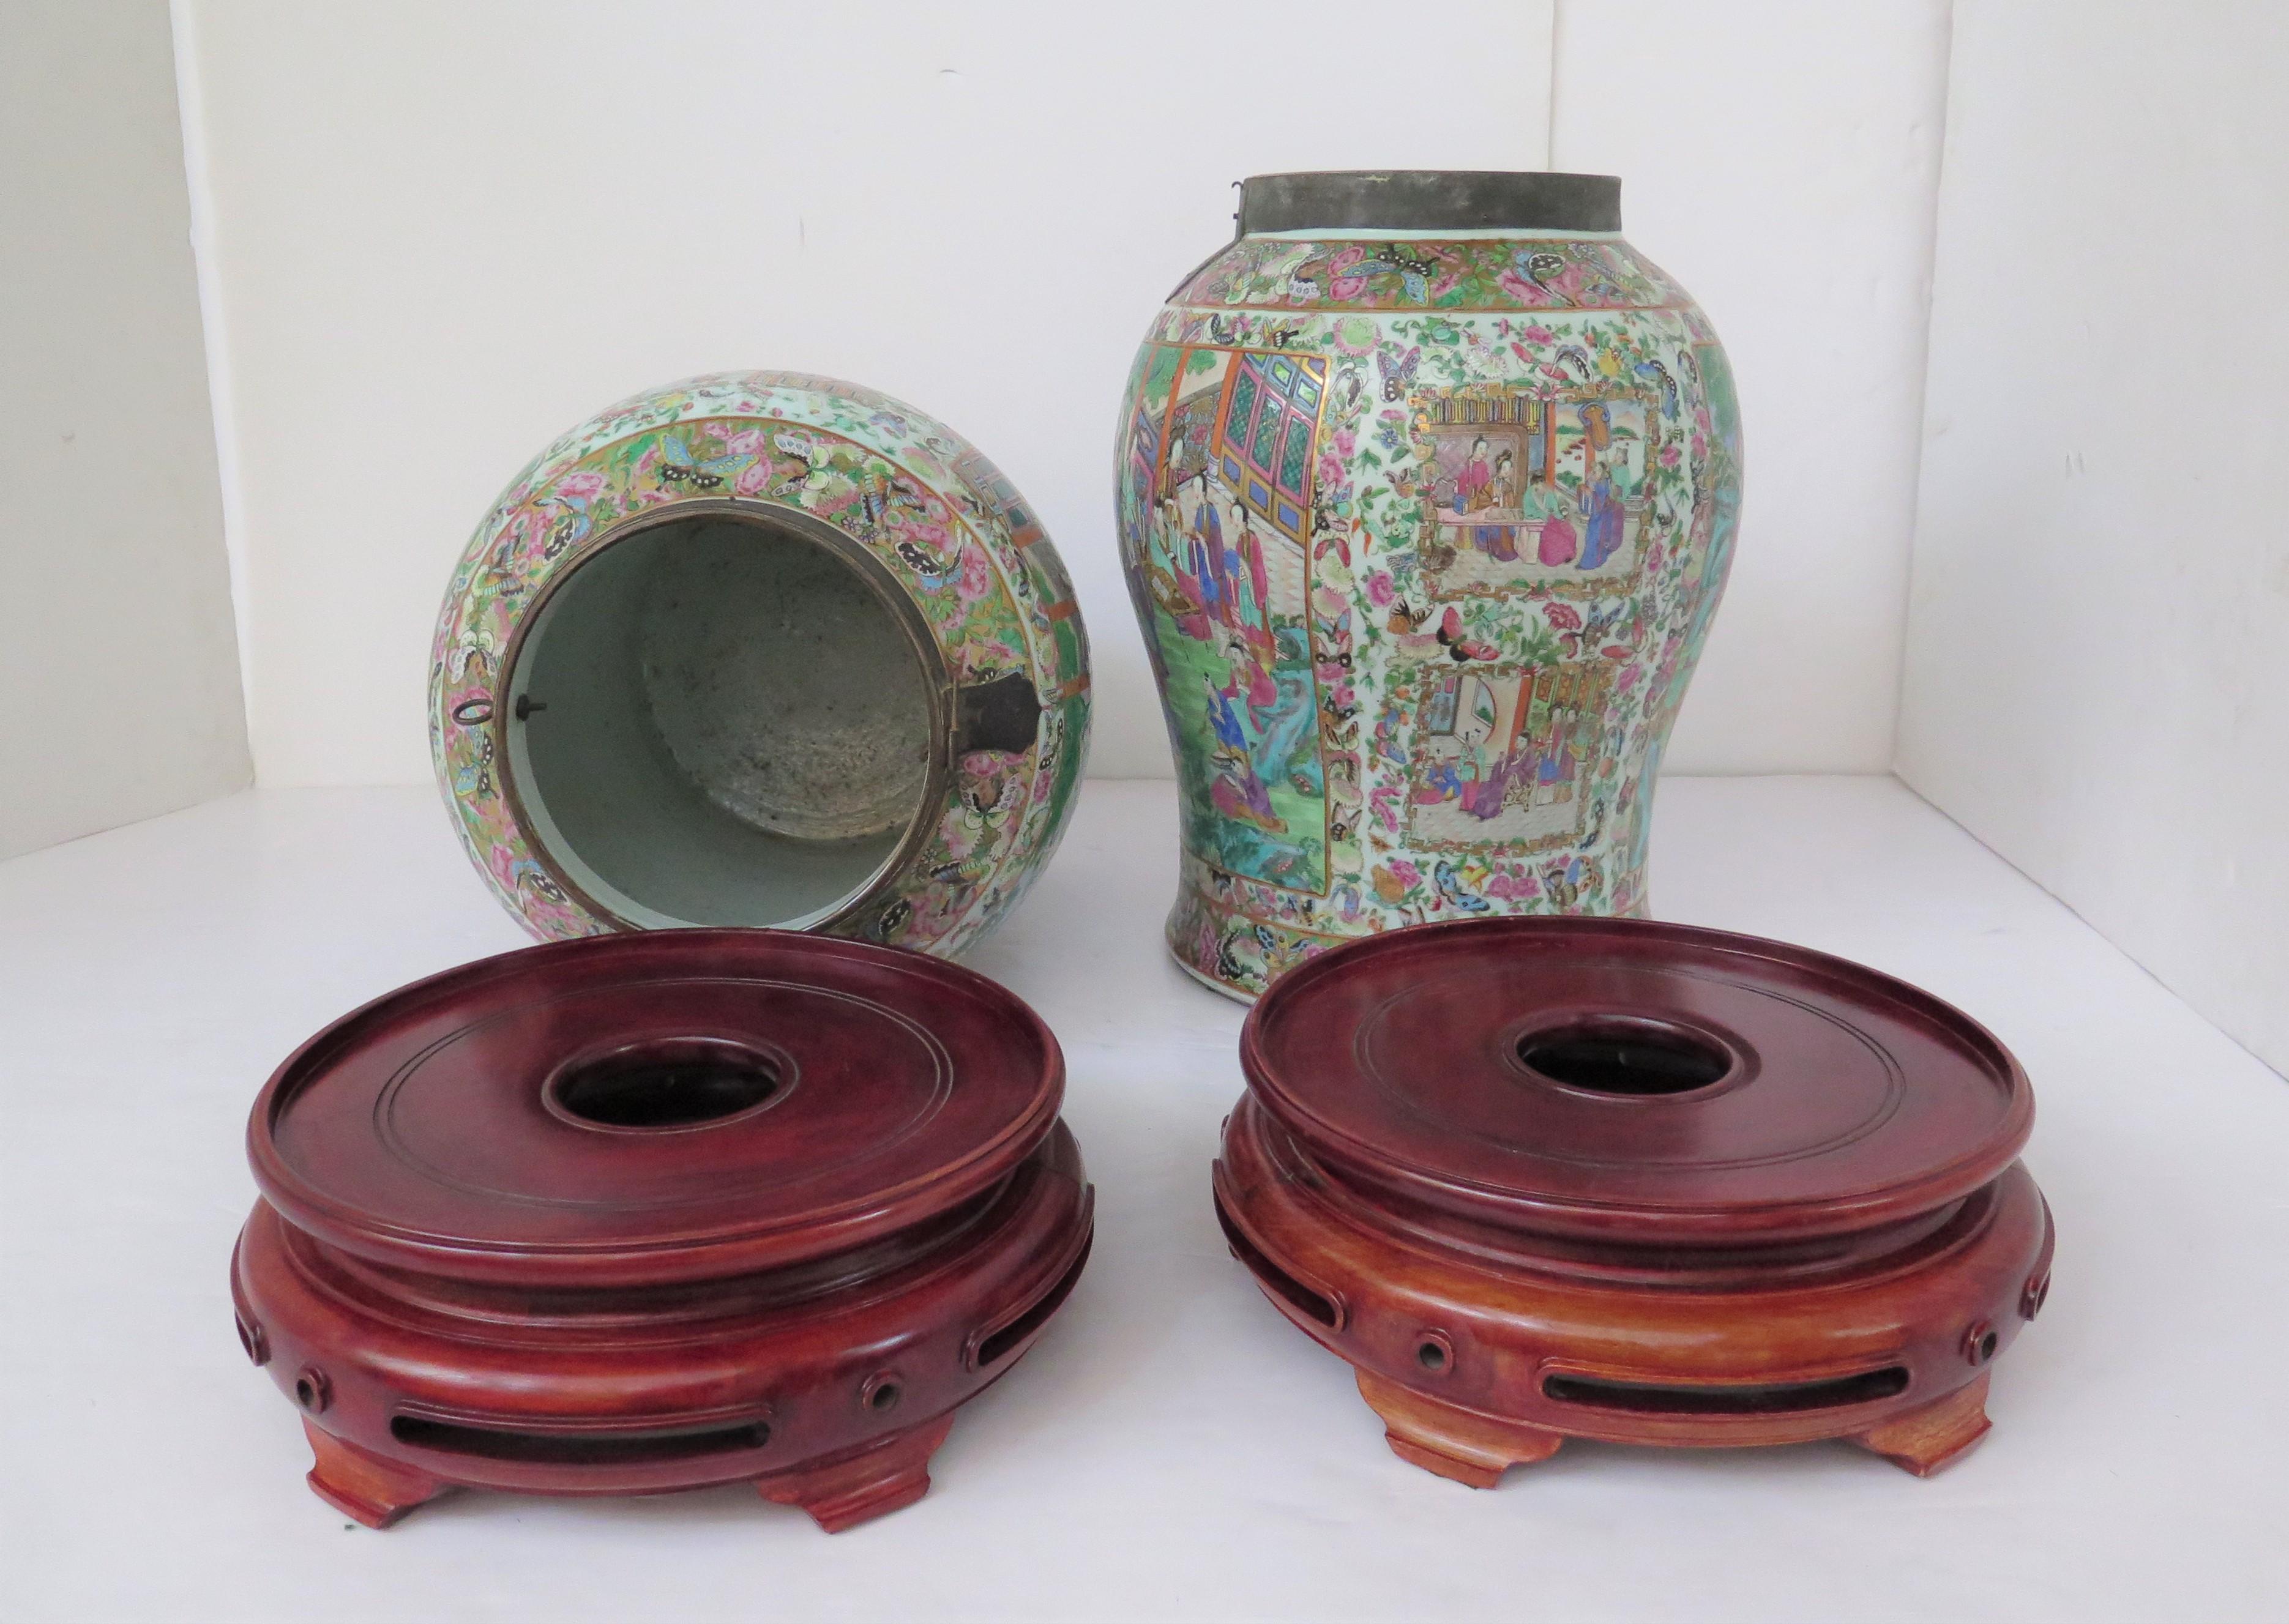 A Pair of Late 18th-Early 19th Century Chinese Lidded Jars  For Sale 5